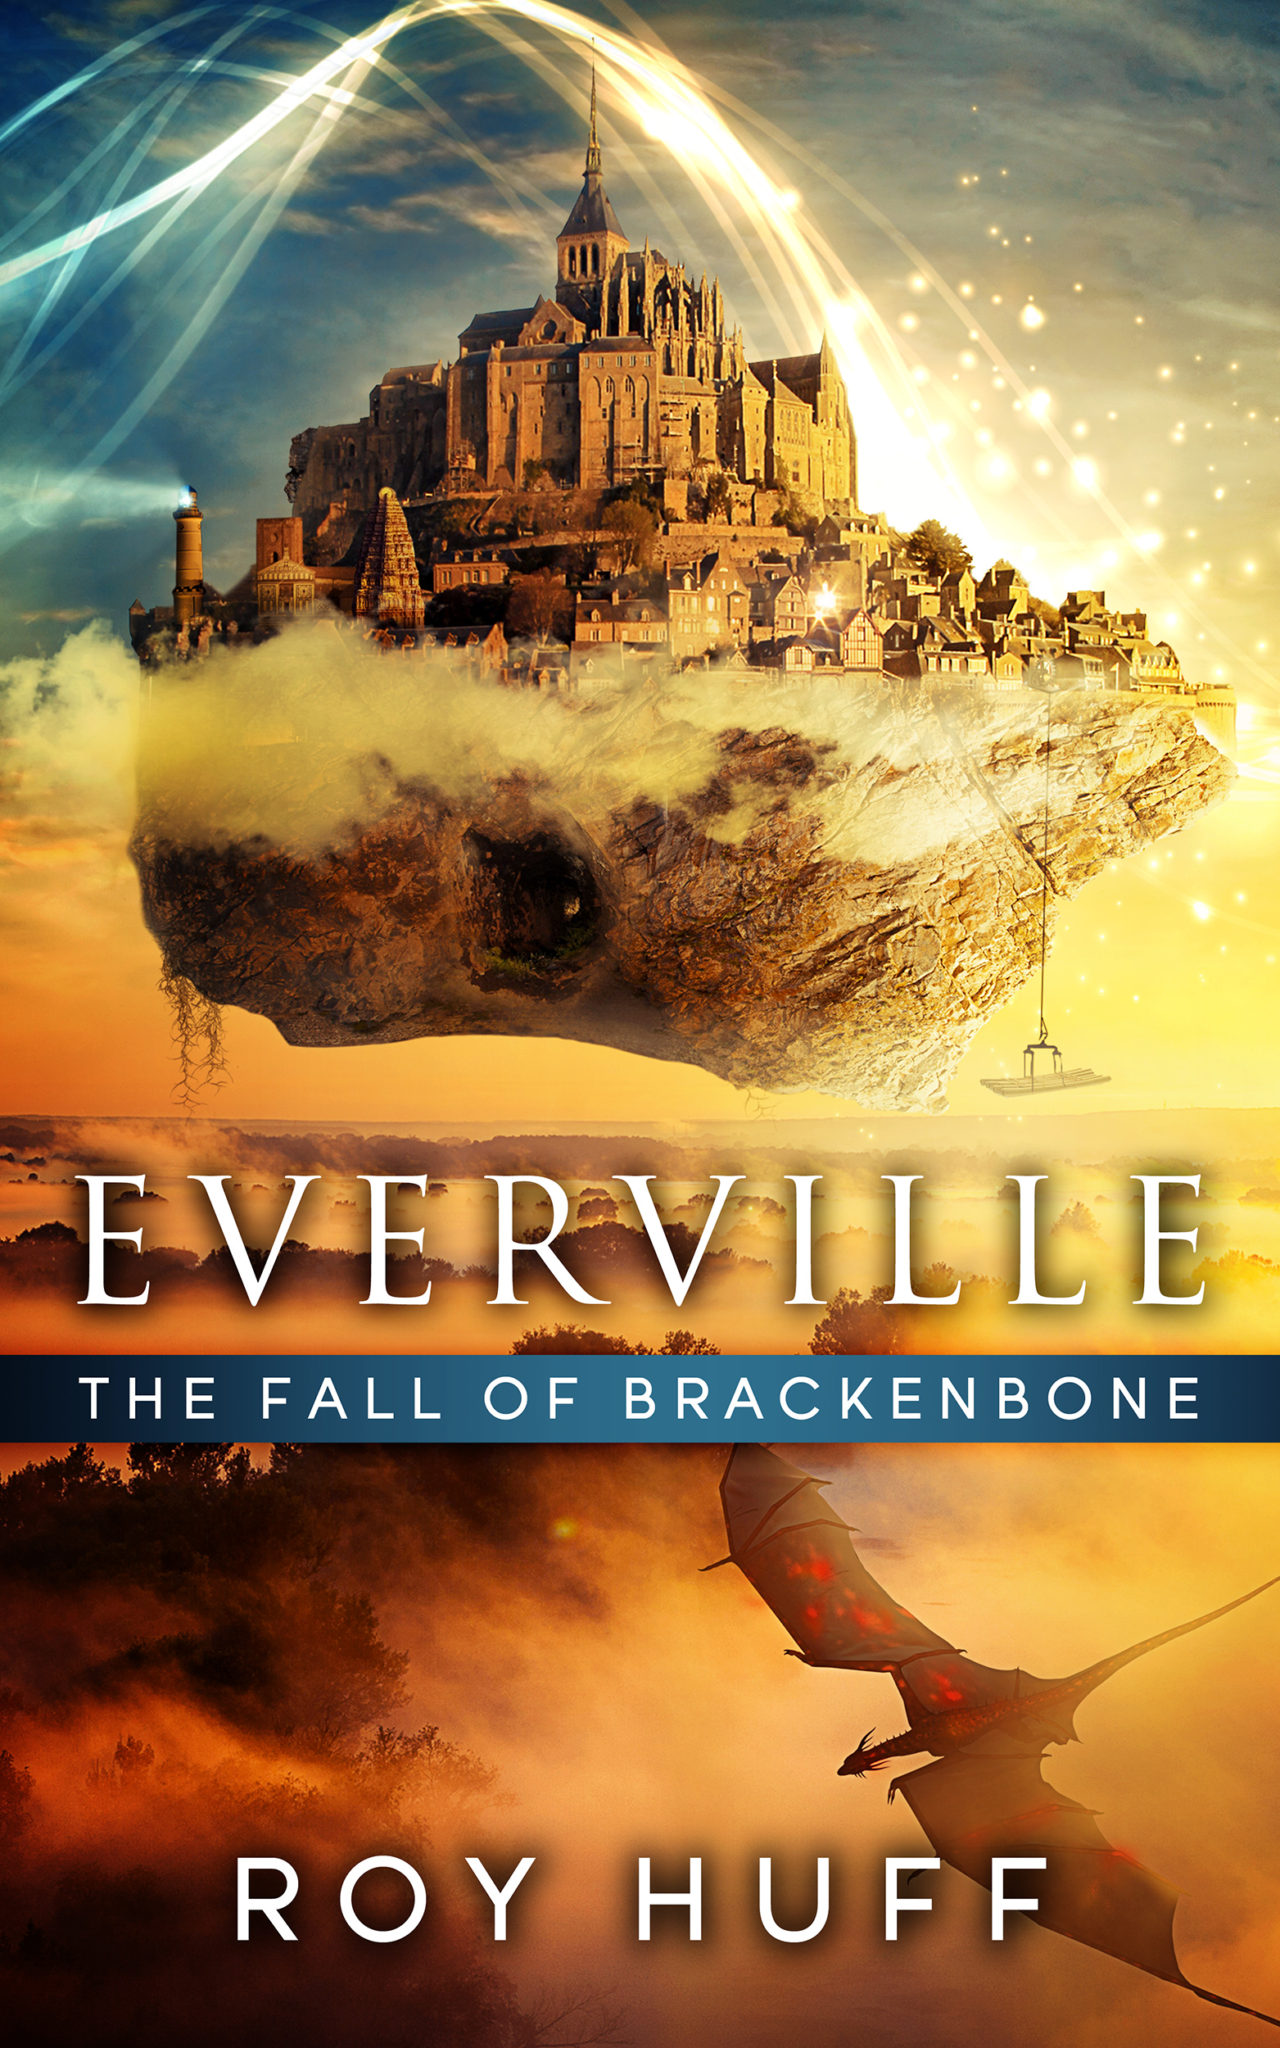 FREE: Everville: The Fall of Brackenbone by Roy Huff